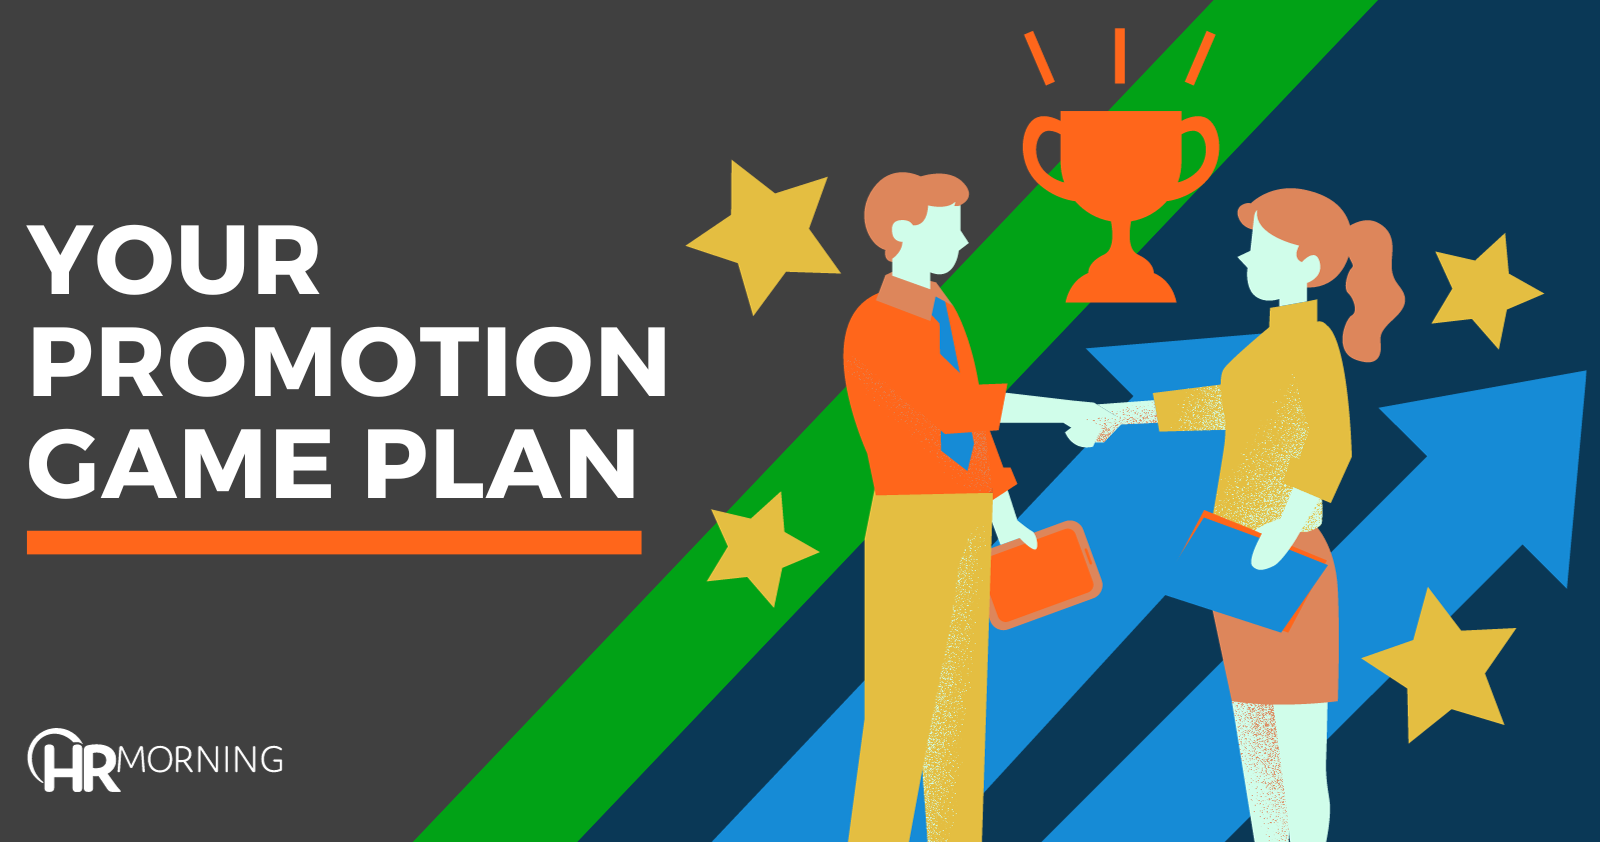 Your promotion game plan